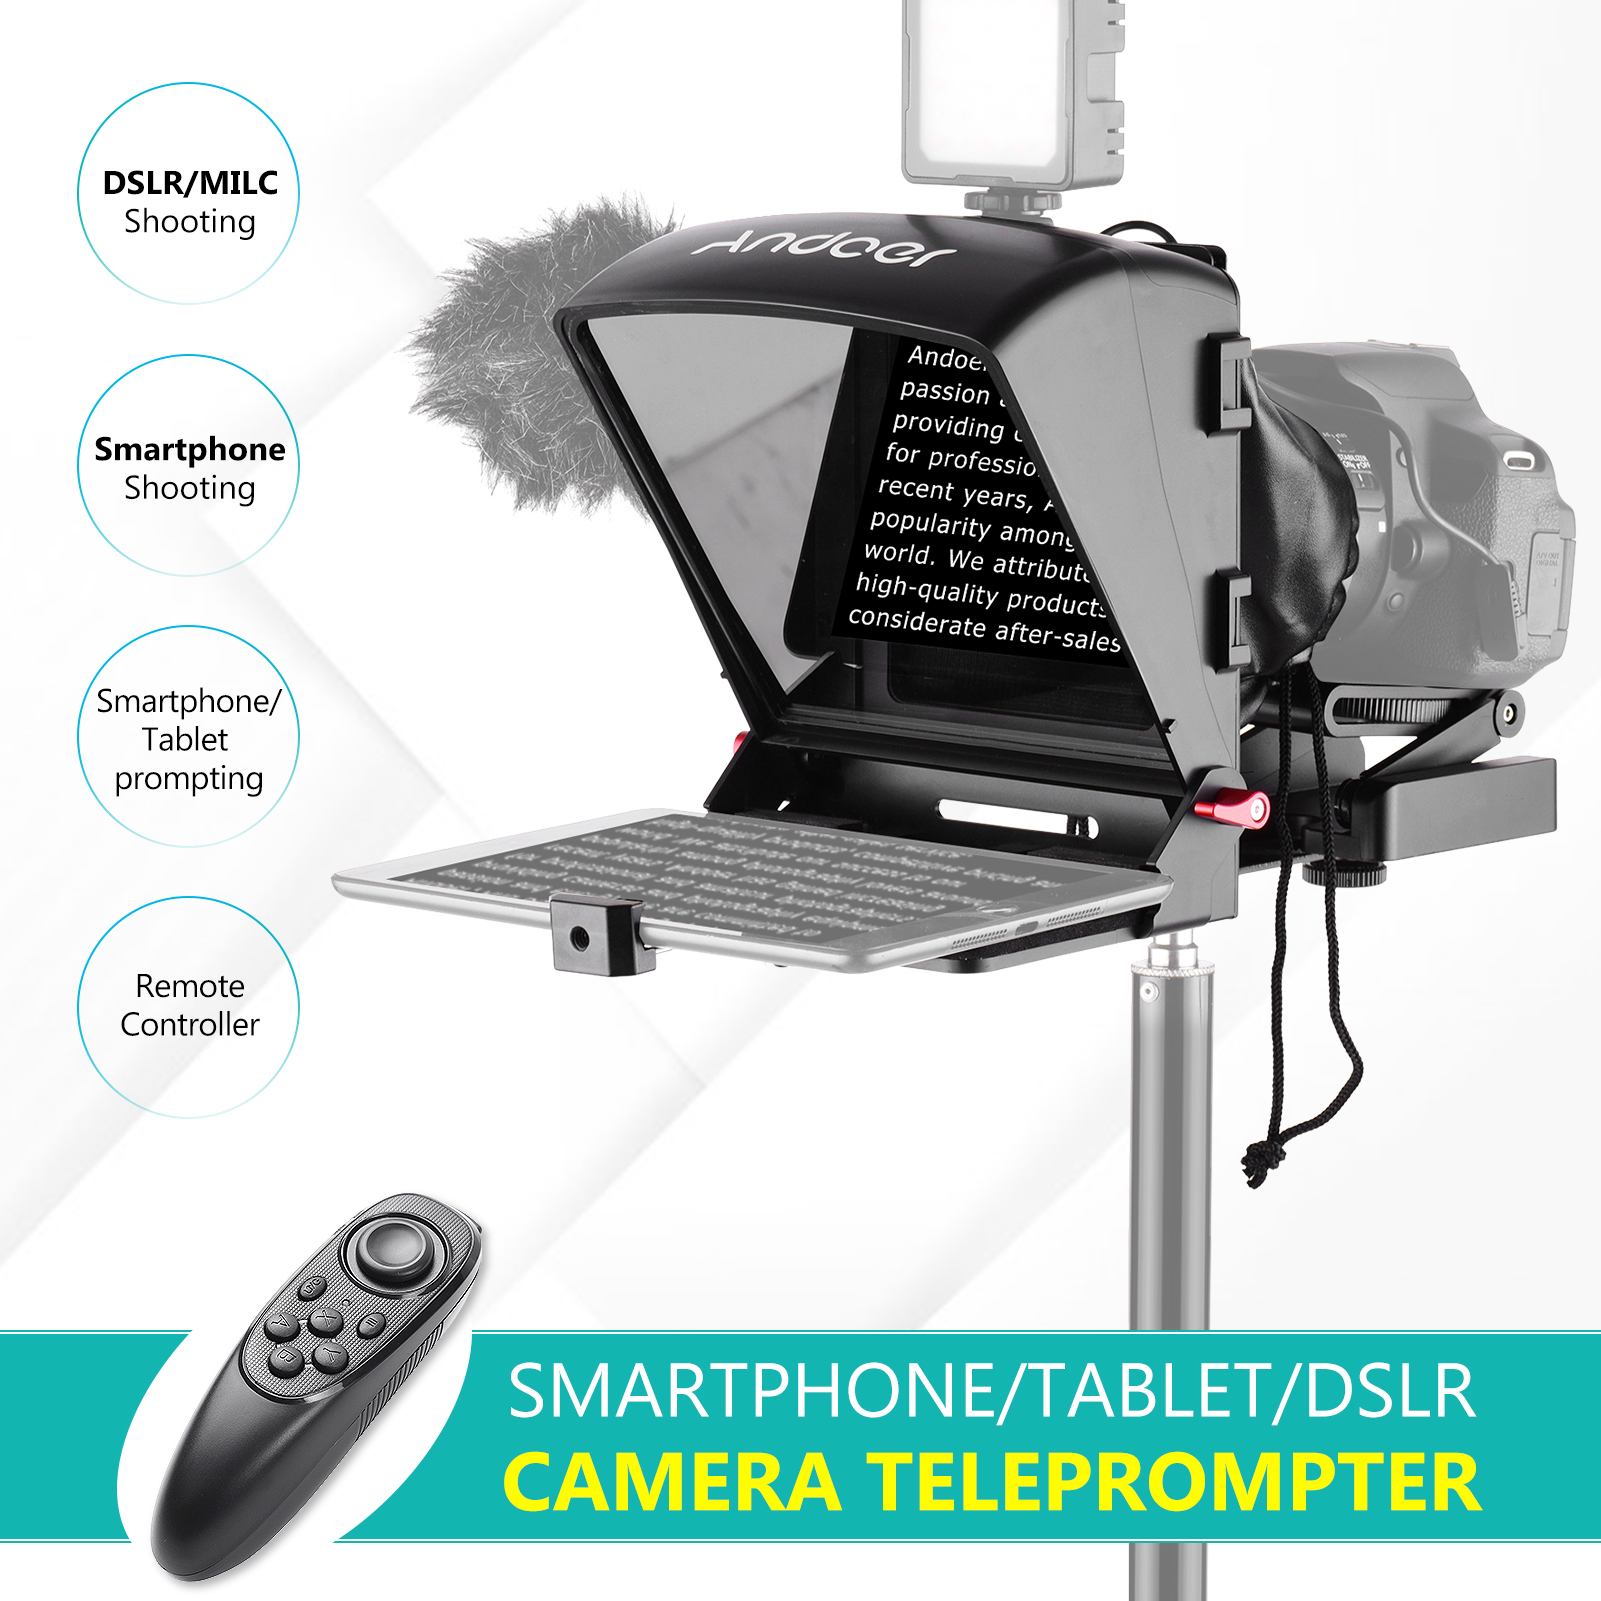 Andoer Teleprompter for Portable Smartphone Prompter with Phone Holder Adapter Remote Control for Video Recording Live Streaming Interview Presentation Stage Speech 